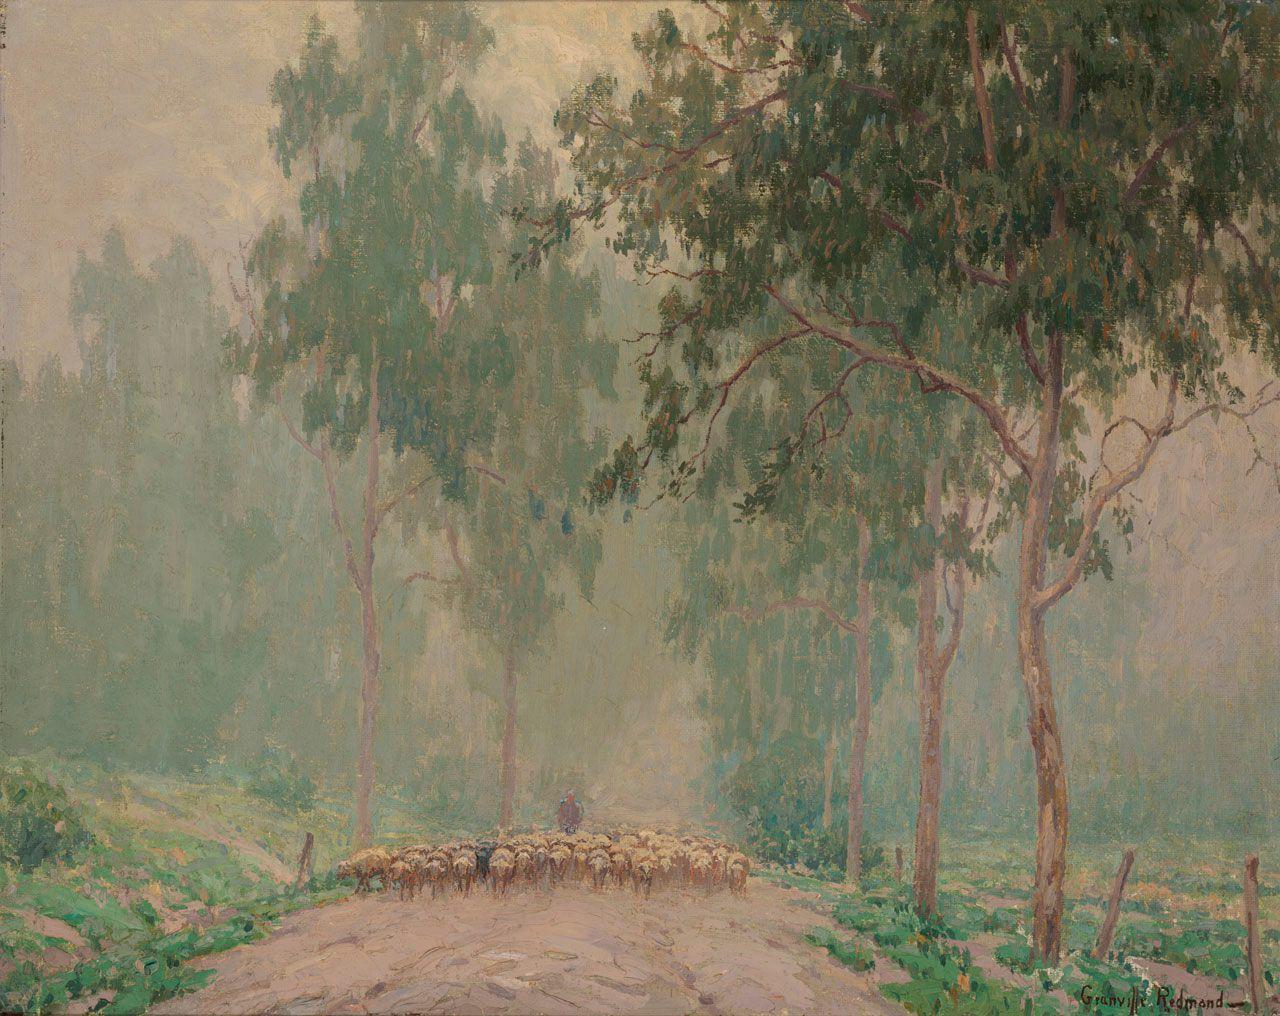 A Shepherd and his Flock in the Early Morning Mist